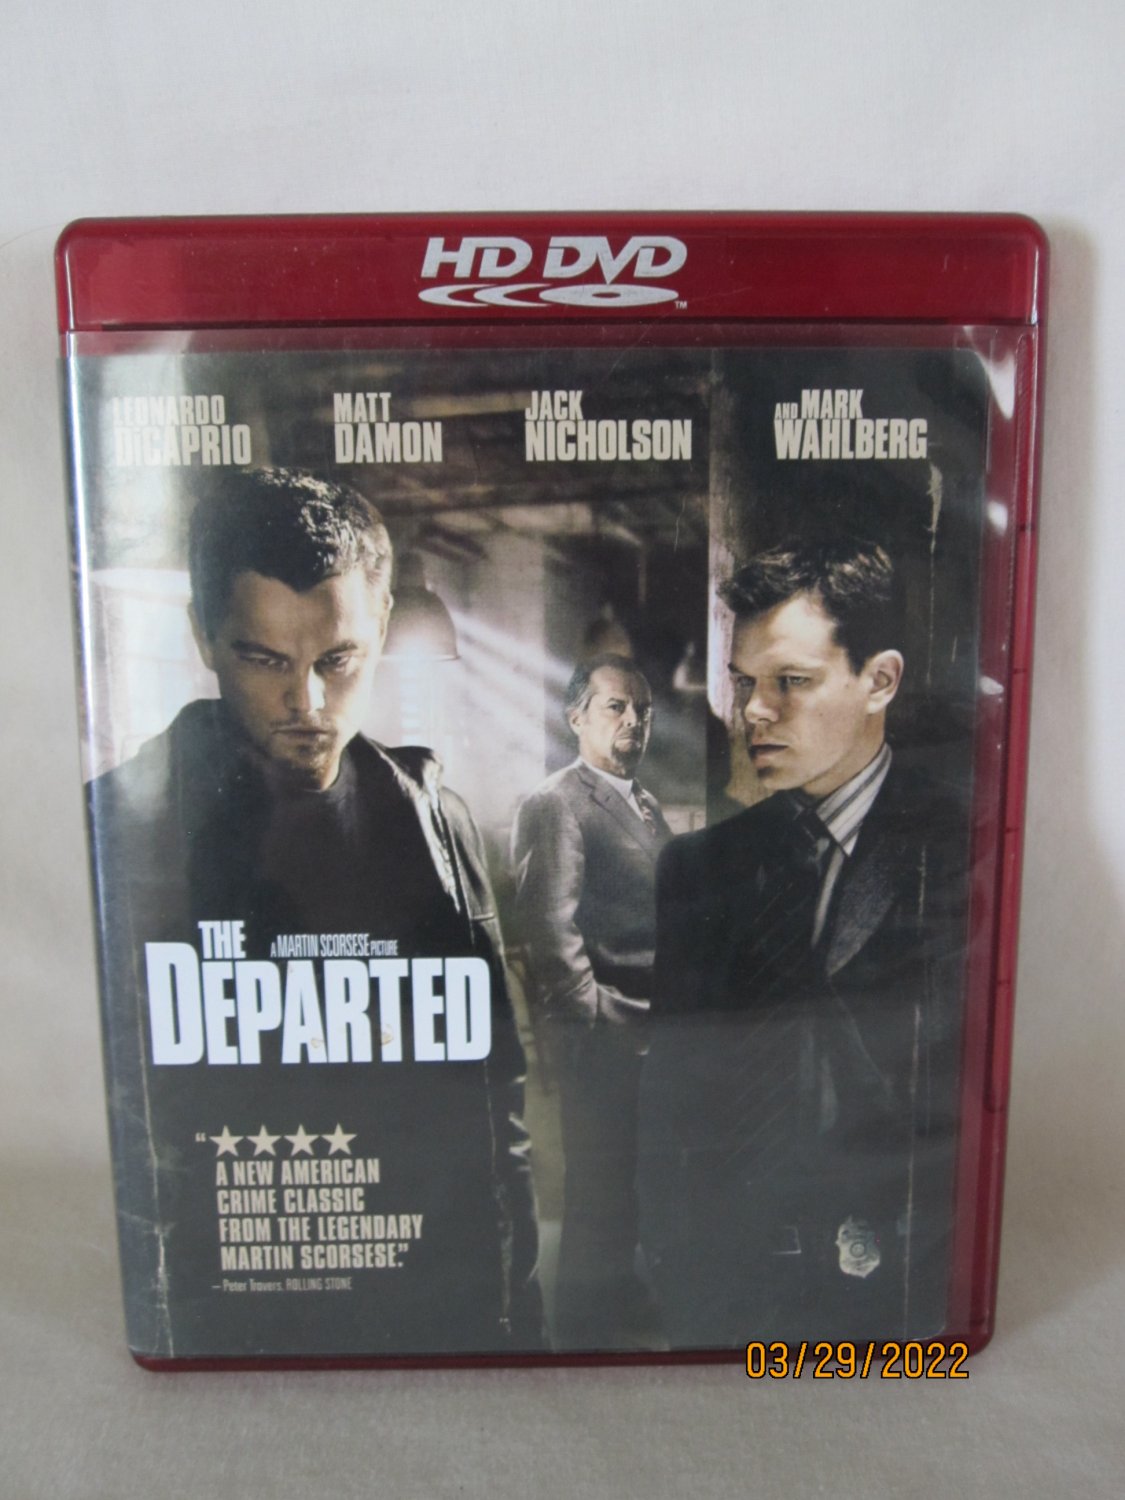 HD DVD: The Departed